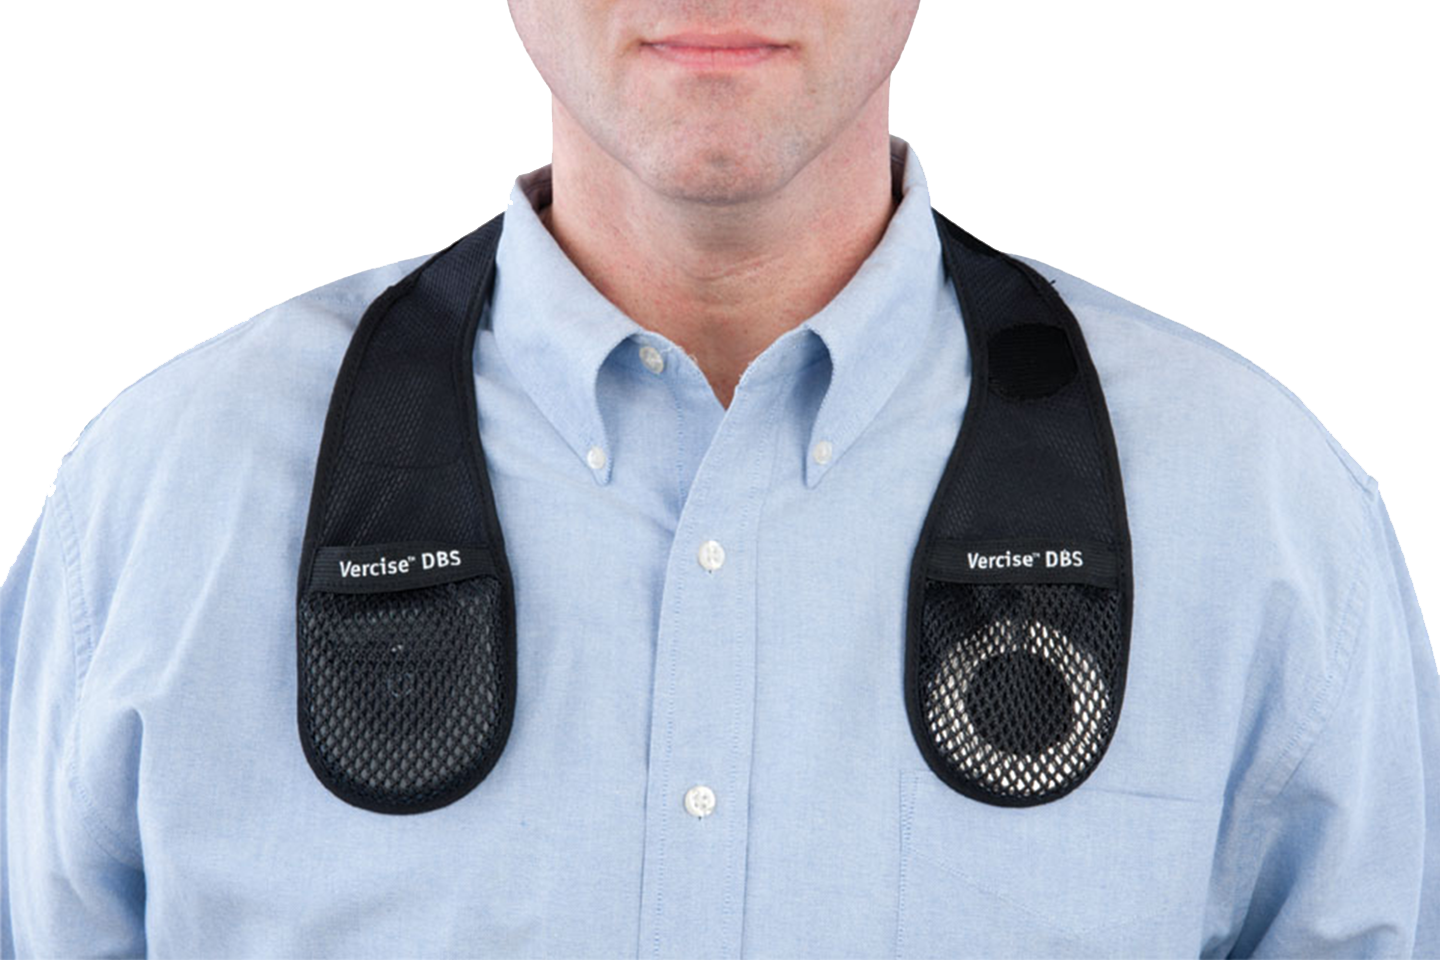 vercise_collar_on_patient_1440x960_eu.png